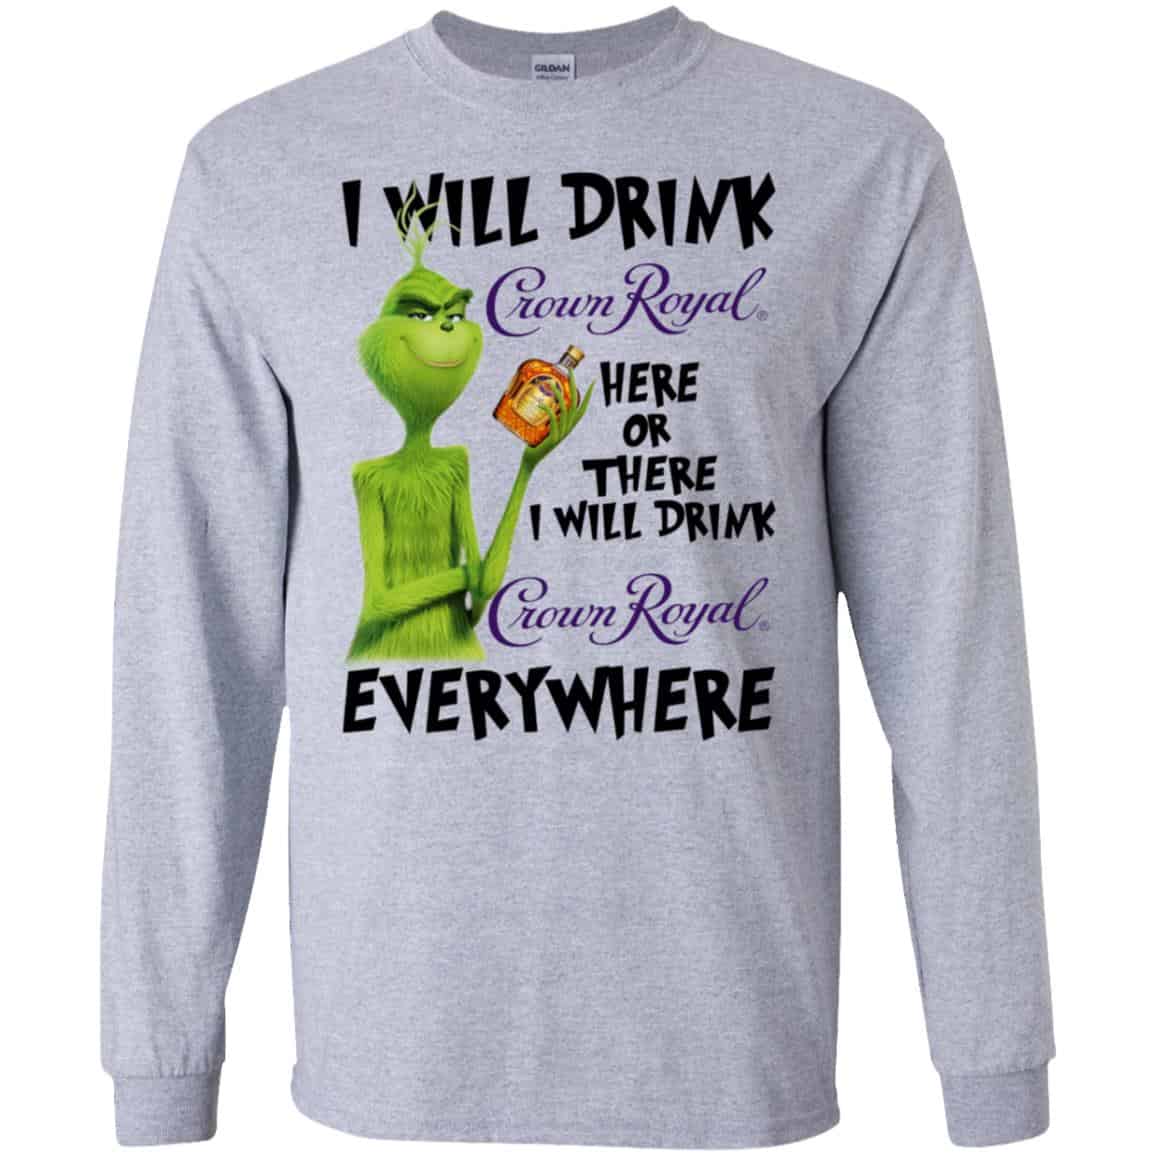 Download The Grinch I Will Drink Crown Royal Here Or There I Will Drink Crown Royal Everywhere T Shirts Hoodie Tank 0stees